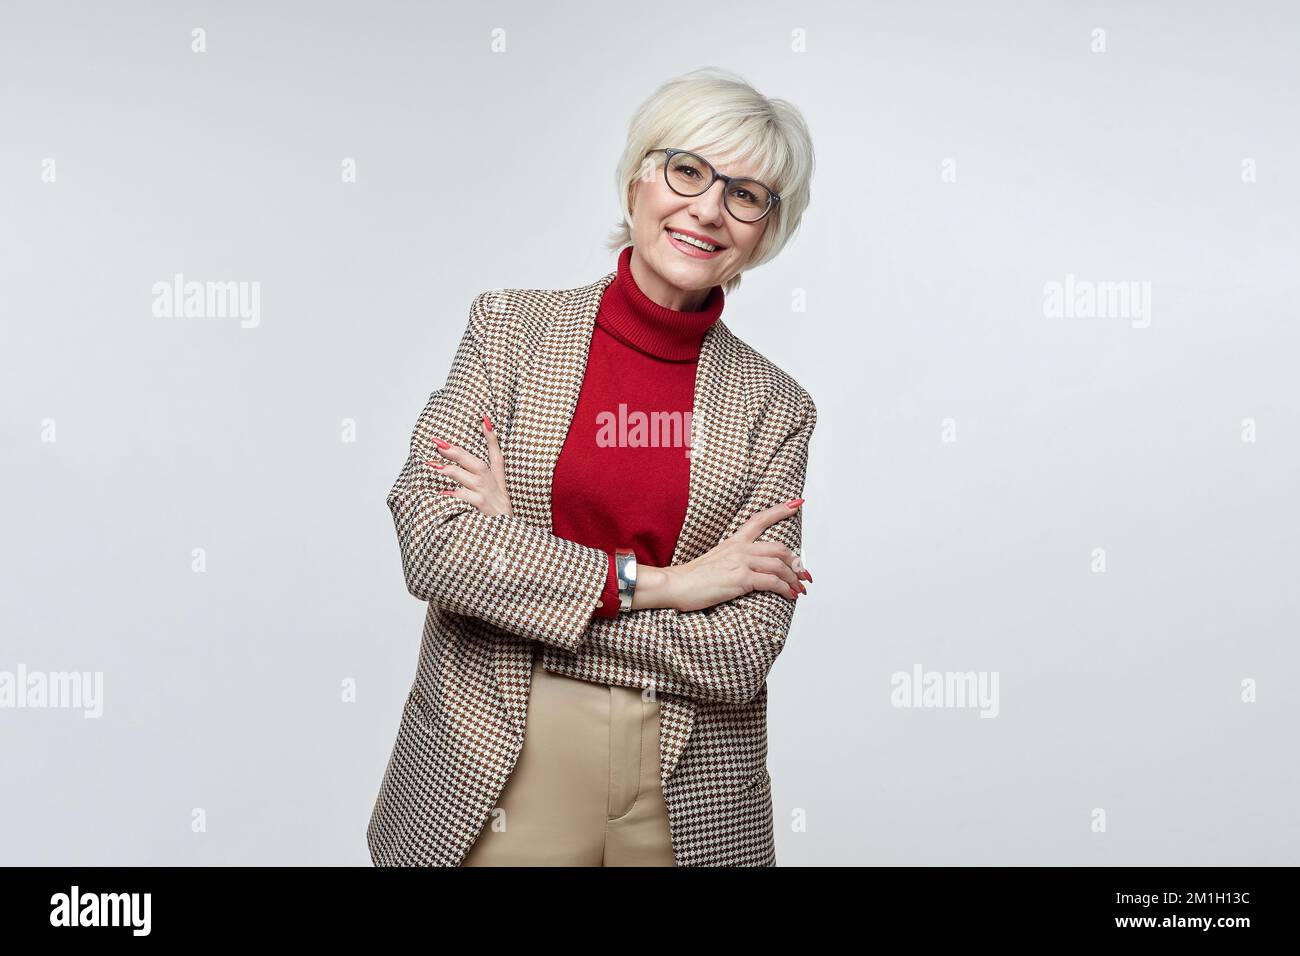 beautiful elderly woman with glasses poses in front of the camera in the studio on a white background. advertising concept of a business woman leader. Stock Photo